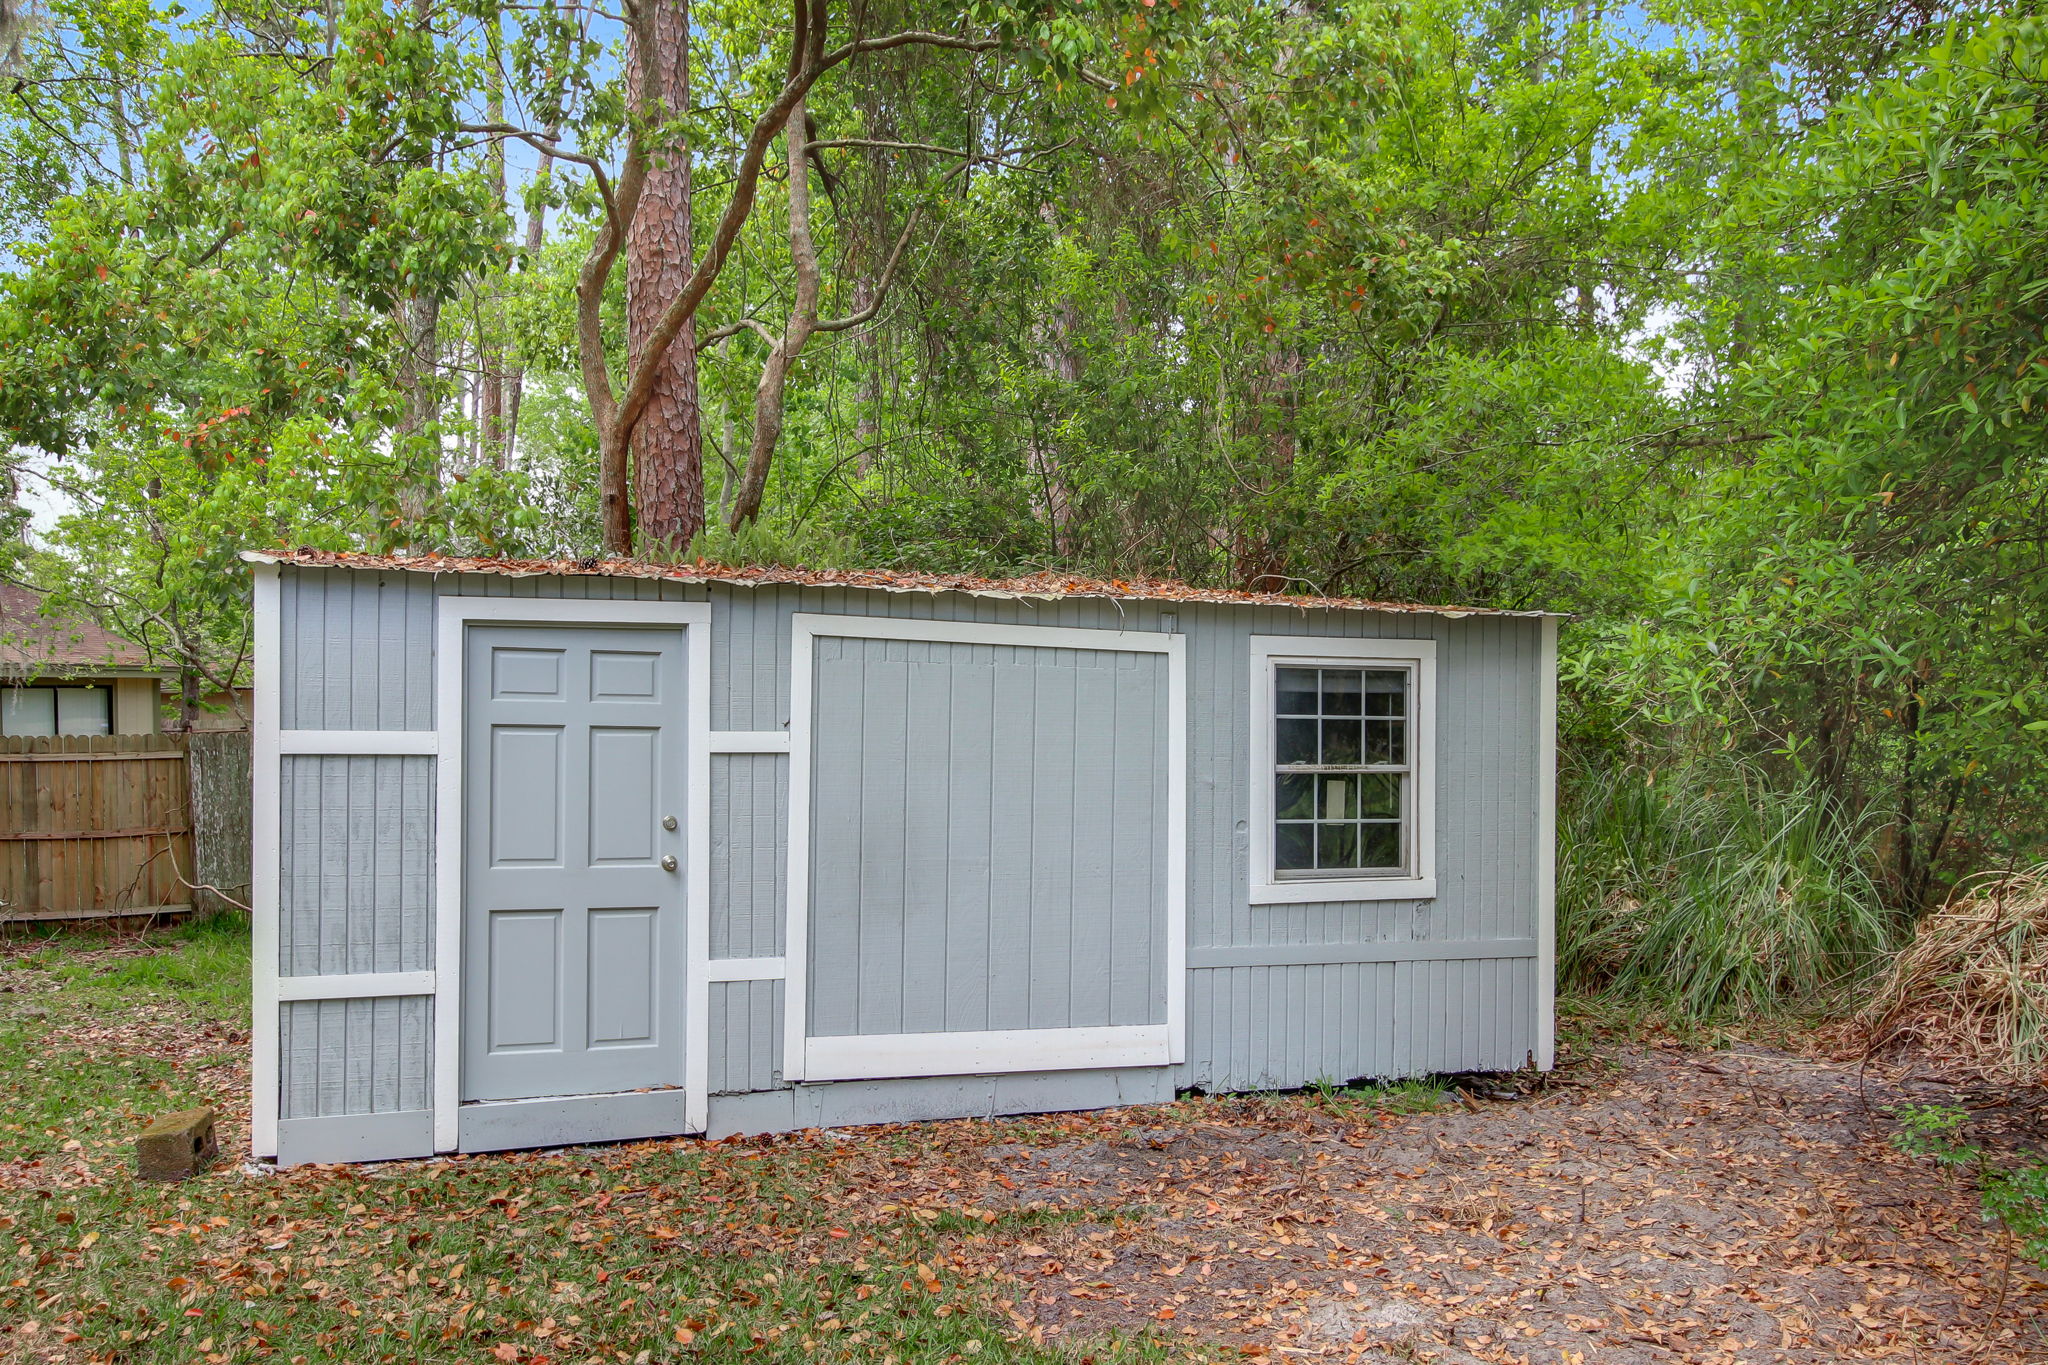 Storage Shed in Back